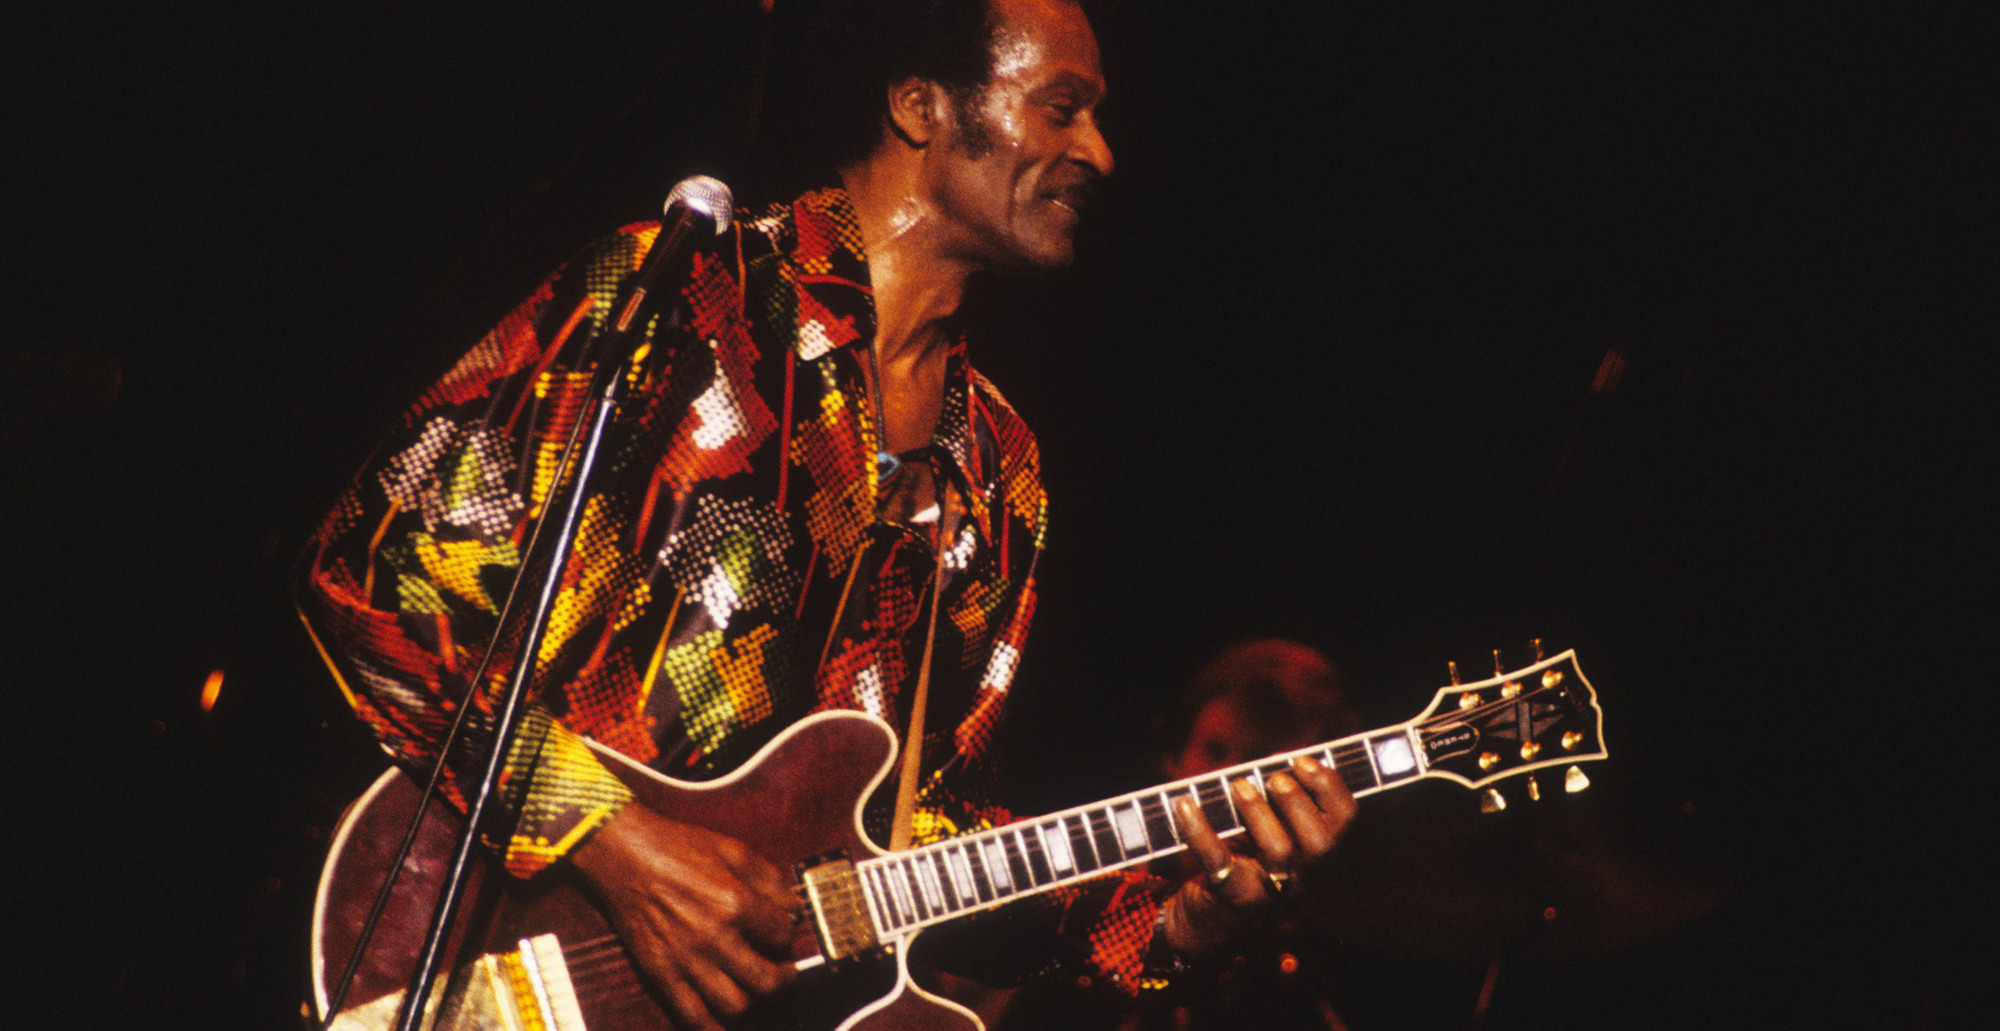 Promised Land (Chuck Berry song) - Wikipedia